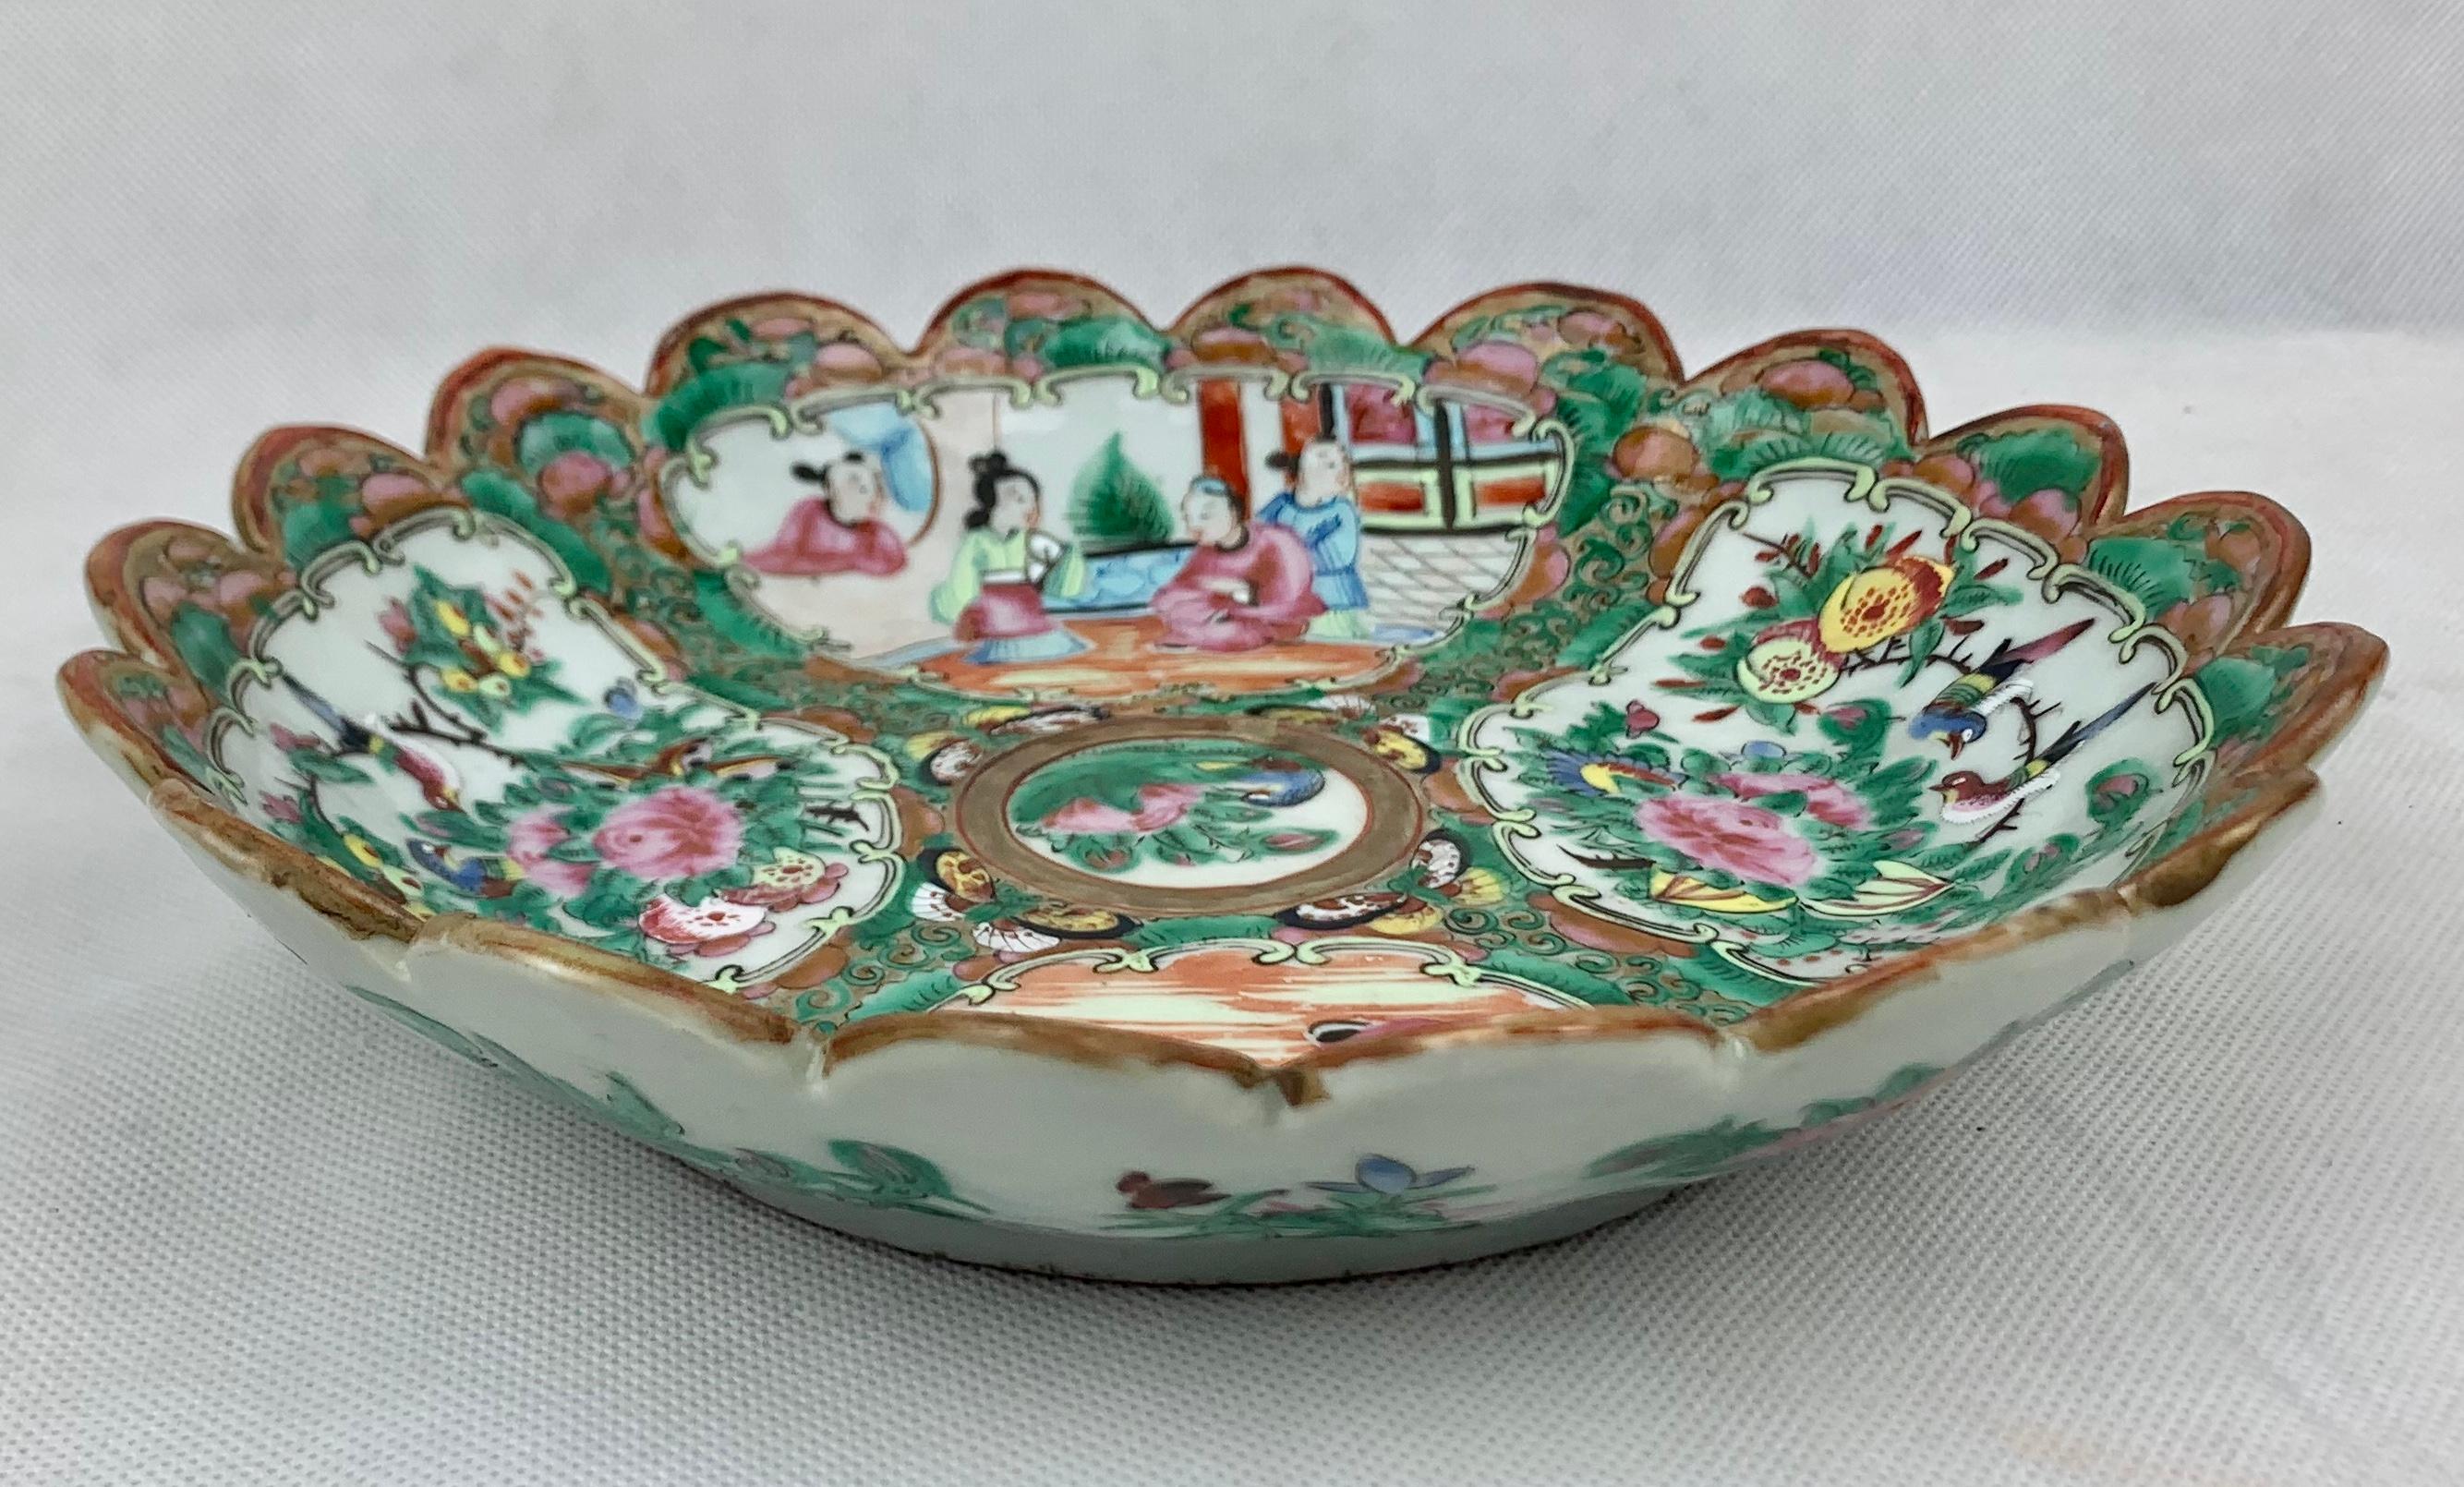 Beautifully executed Rose Medallion porcelain bowl with a scalloped edge. The pattern is divided into four quadrants with two sections showing people interacting and two sections with birds and flowers. The back border of the bowl is hand decorated